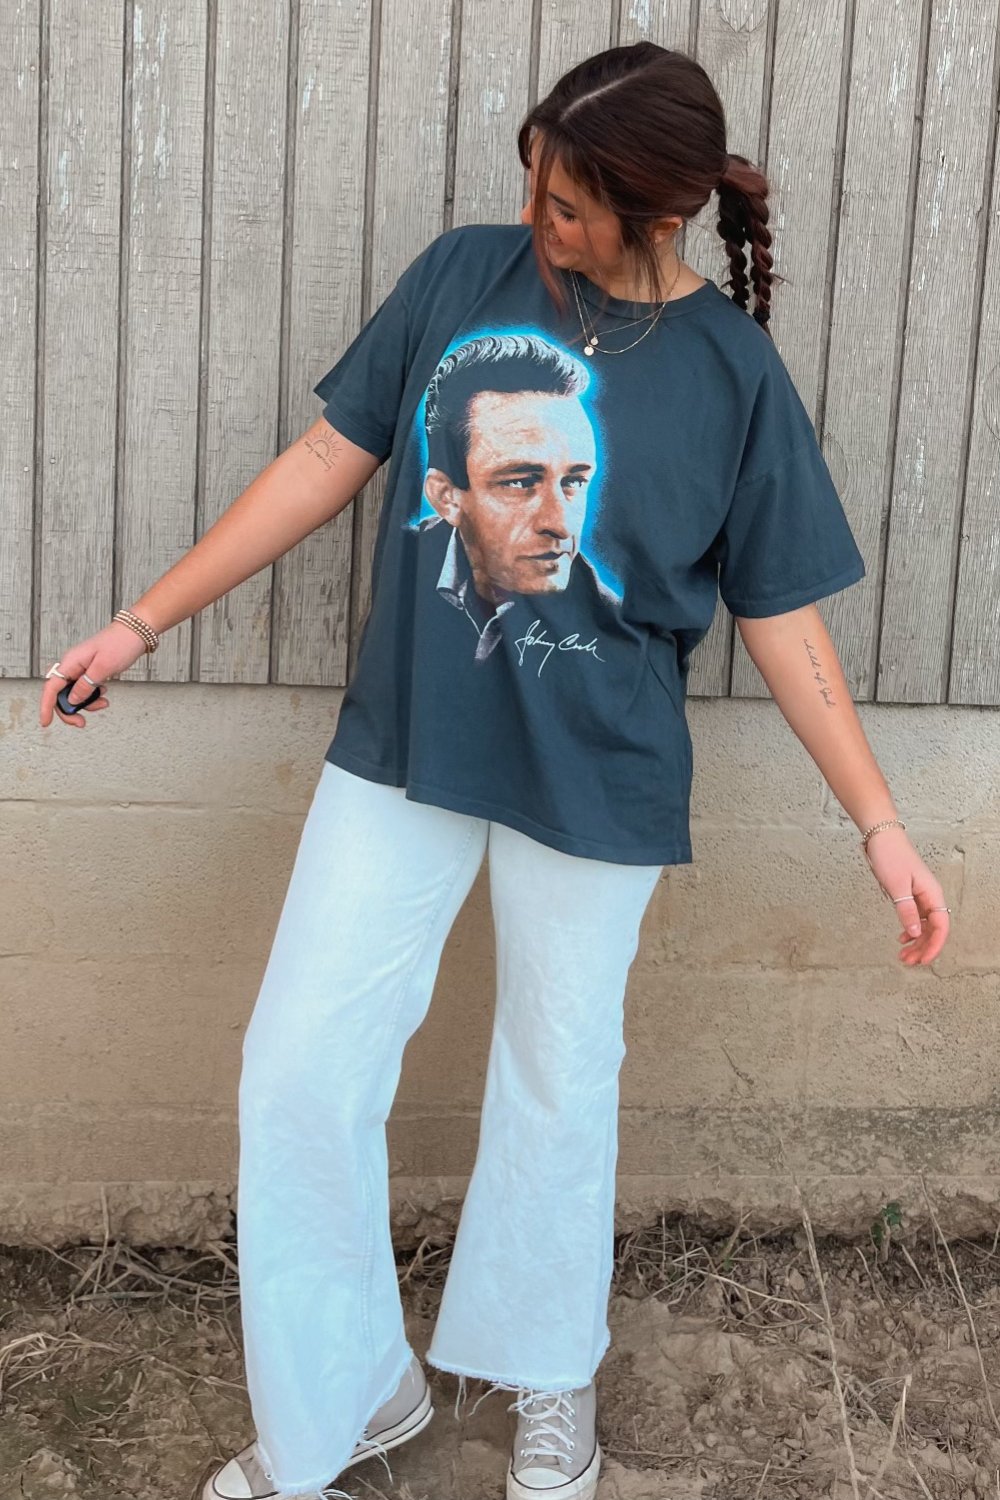 Daydreamer Graphic Tee | Johnny Cash | Merch T-Shirt - Women's Shirts & Tops - Blooming Daily